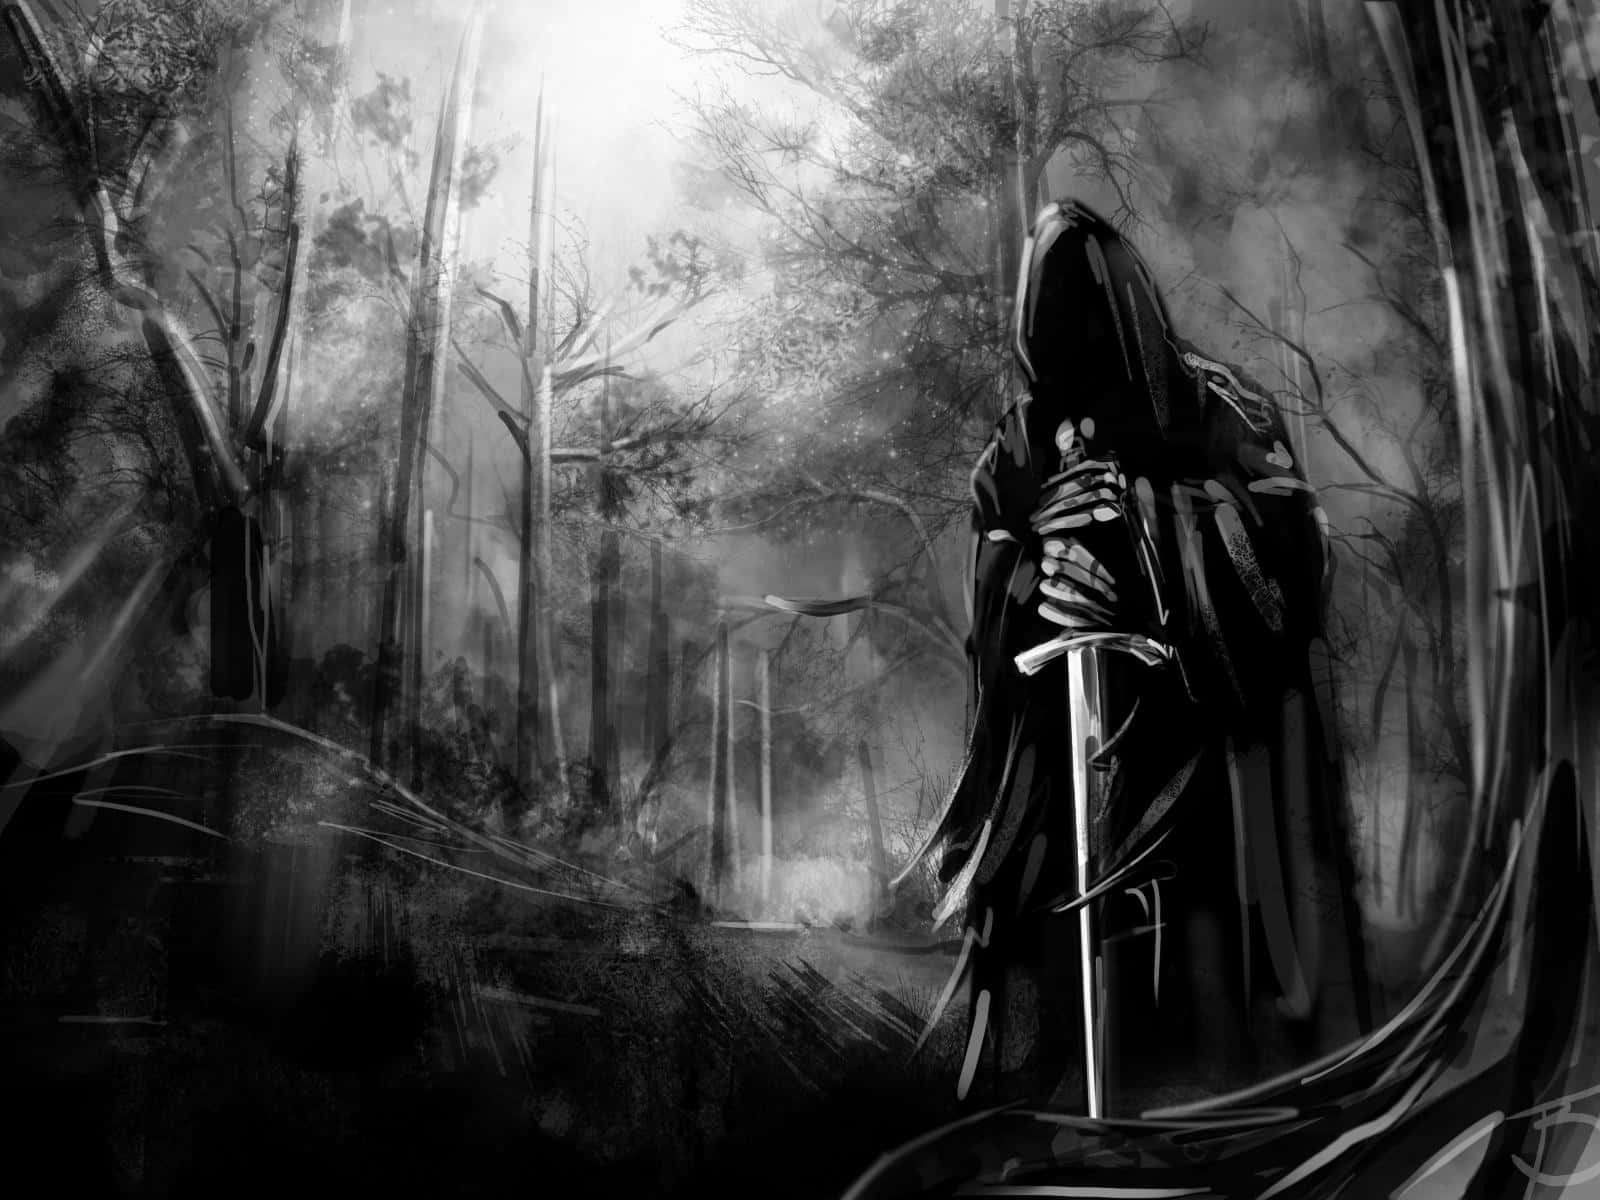 The Chilling Presence of Death: A Grim Reaper Image